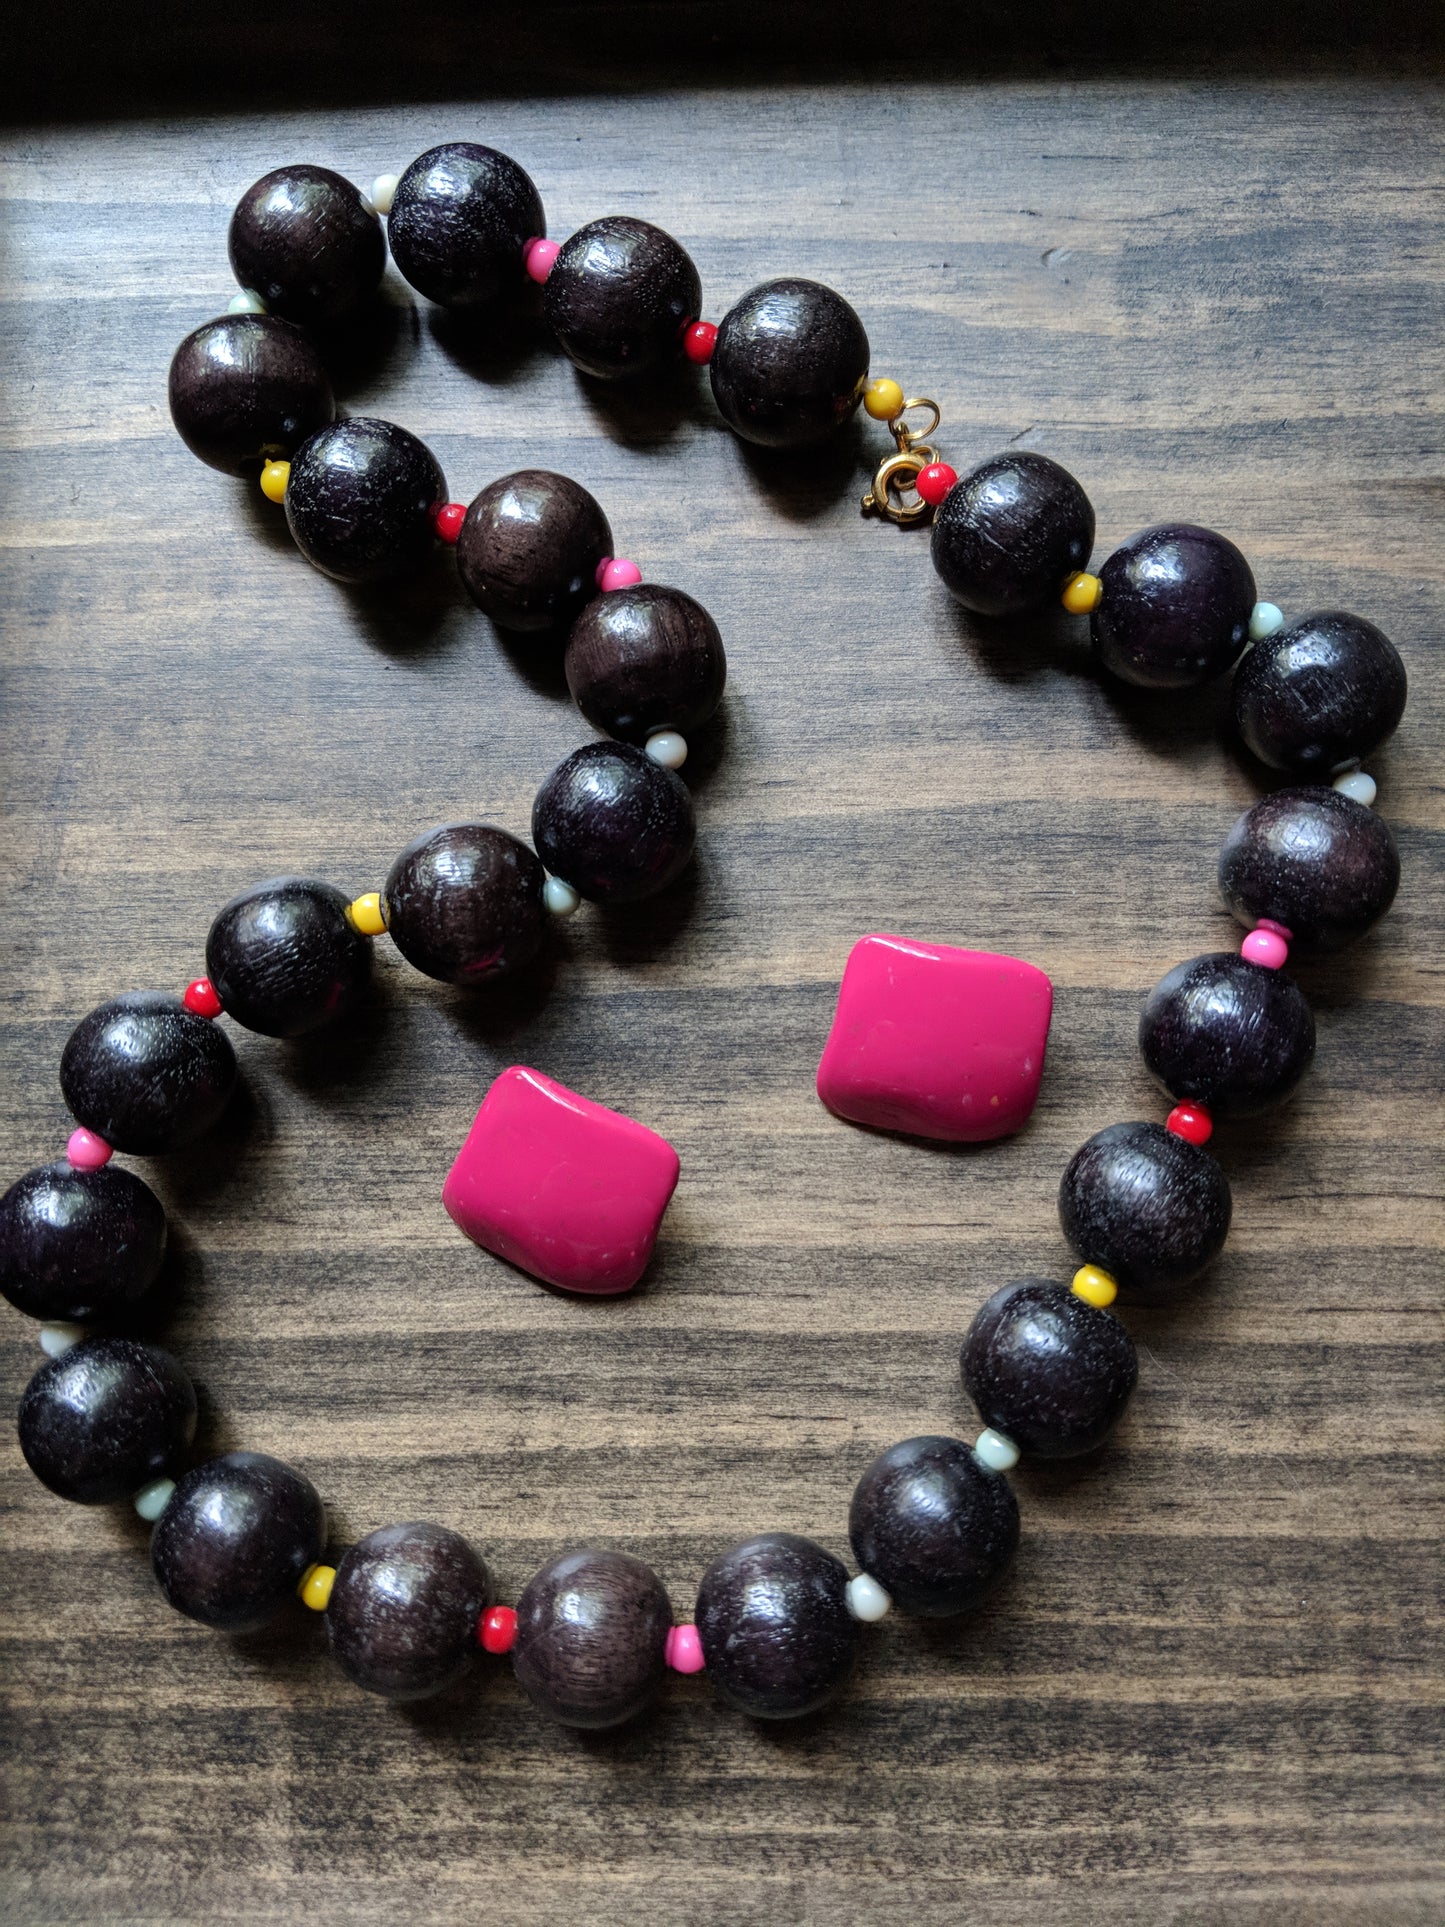 Vintage Wood and Plastic Beaded Necklace w/ Bergere Hot Pink Earrings